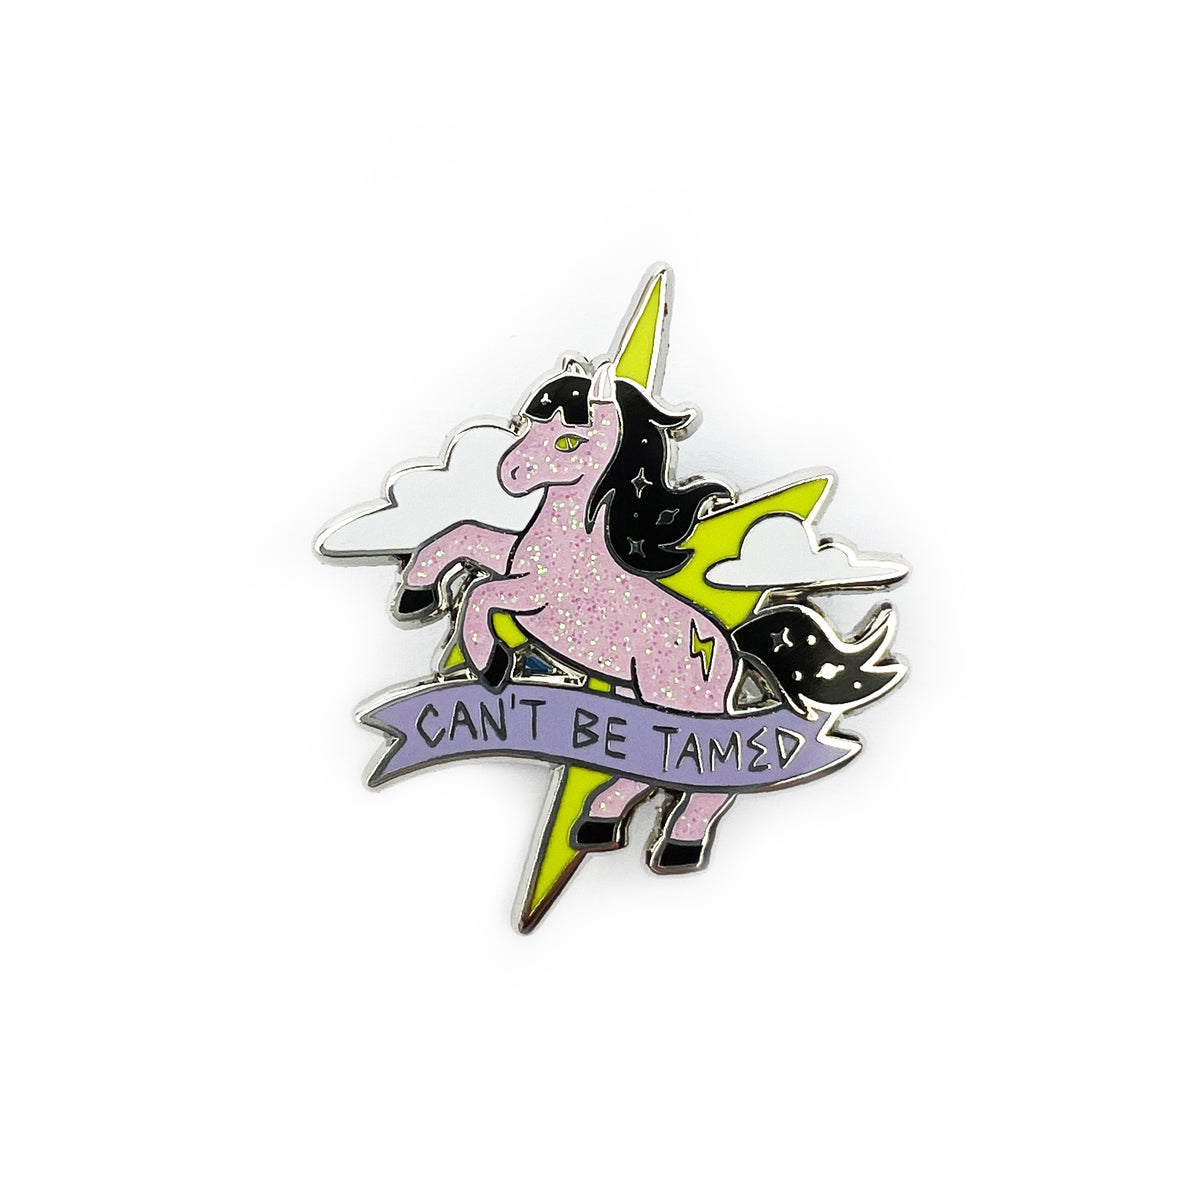 CAN'T BE TAMED // ENAMEL PIN